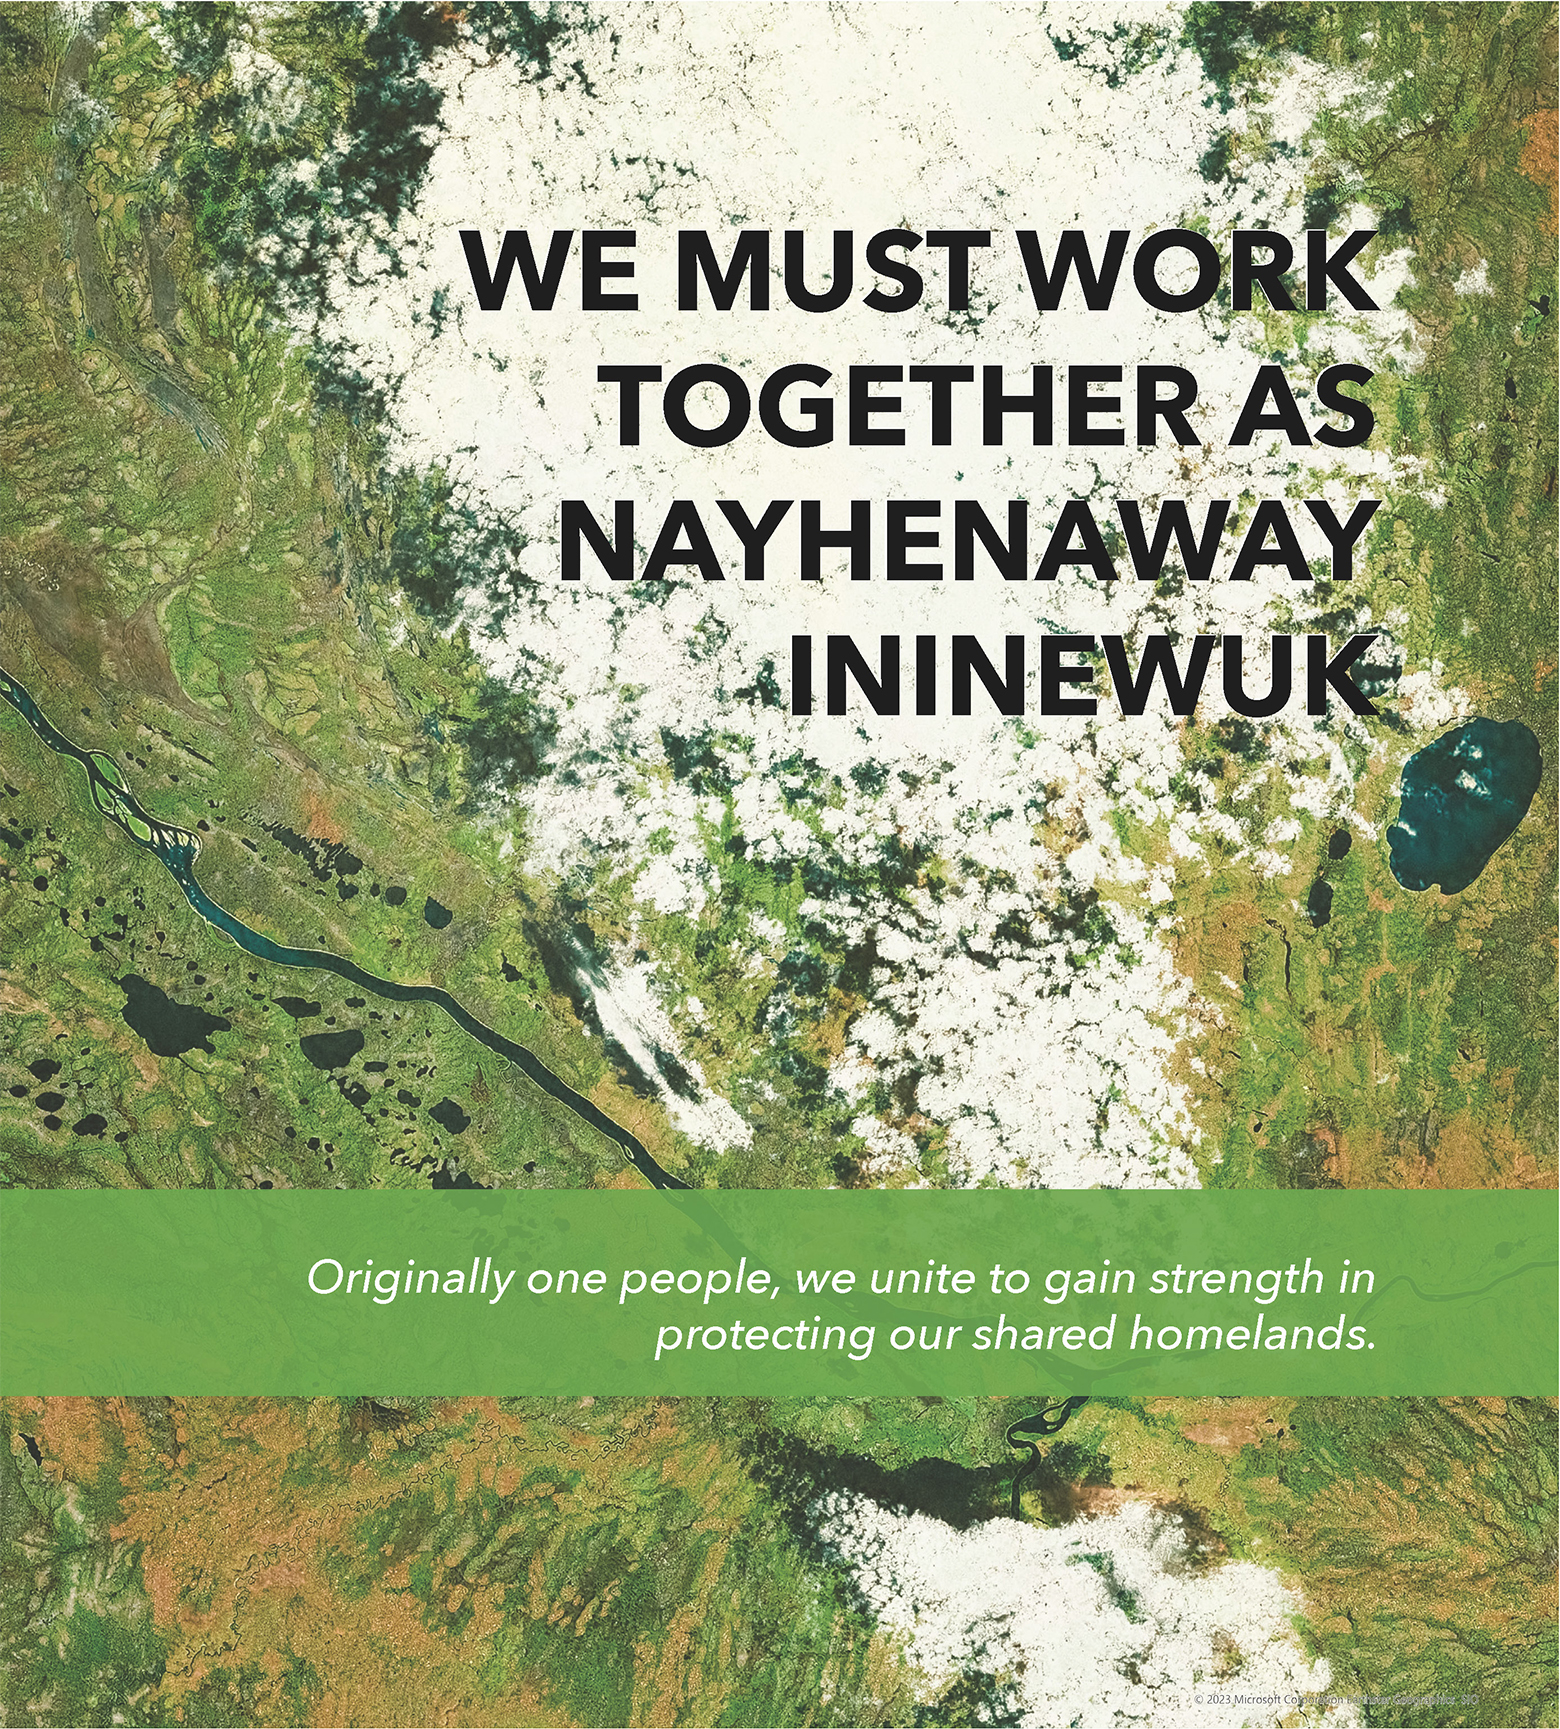 WE MUST WORK TOGETHER AS NAYHENAWAY INNINEWUK